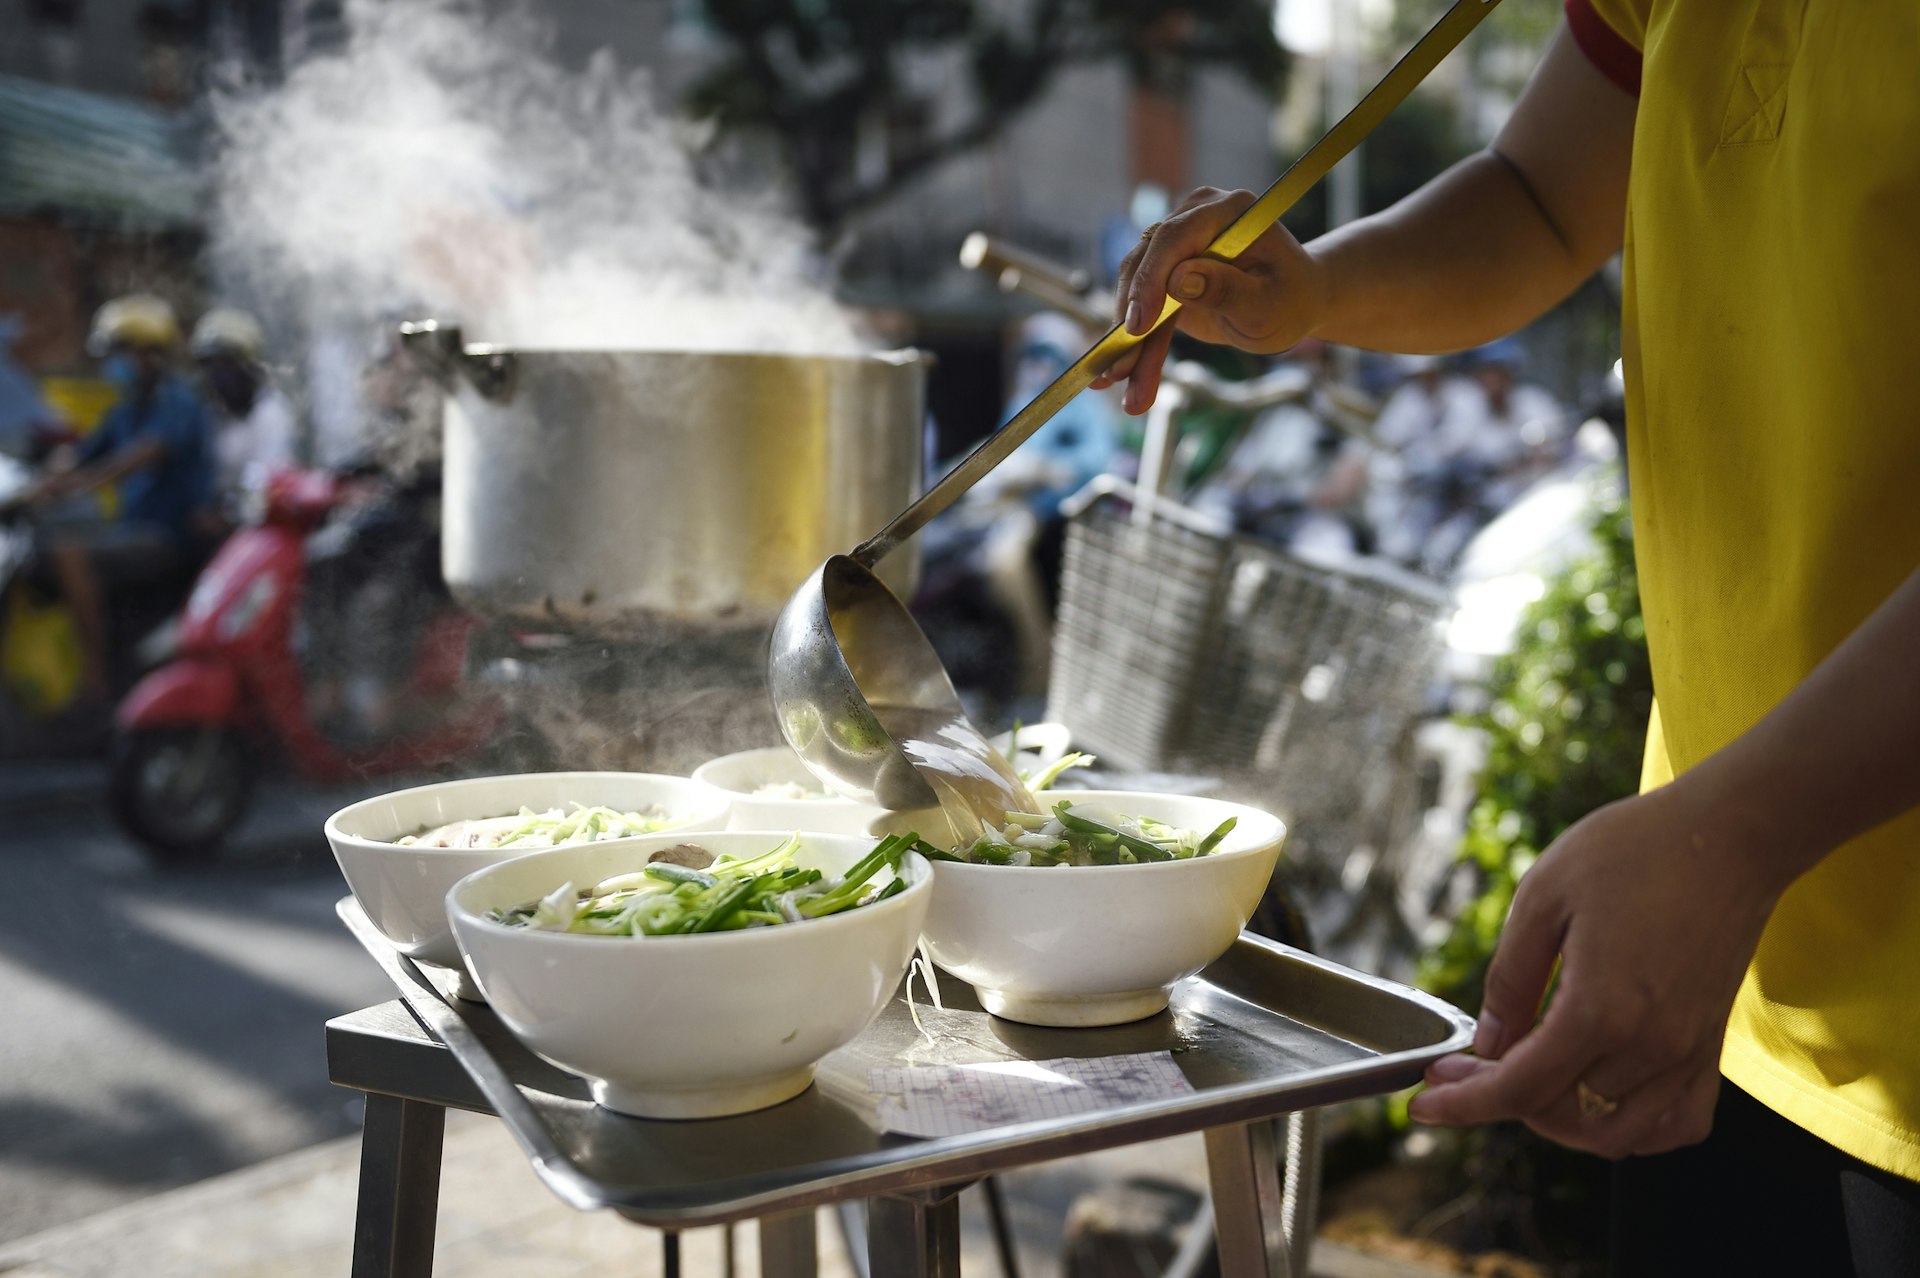 A hand ladels steaming soup into four bowls at a street food stall as motorcycles pass in the background